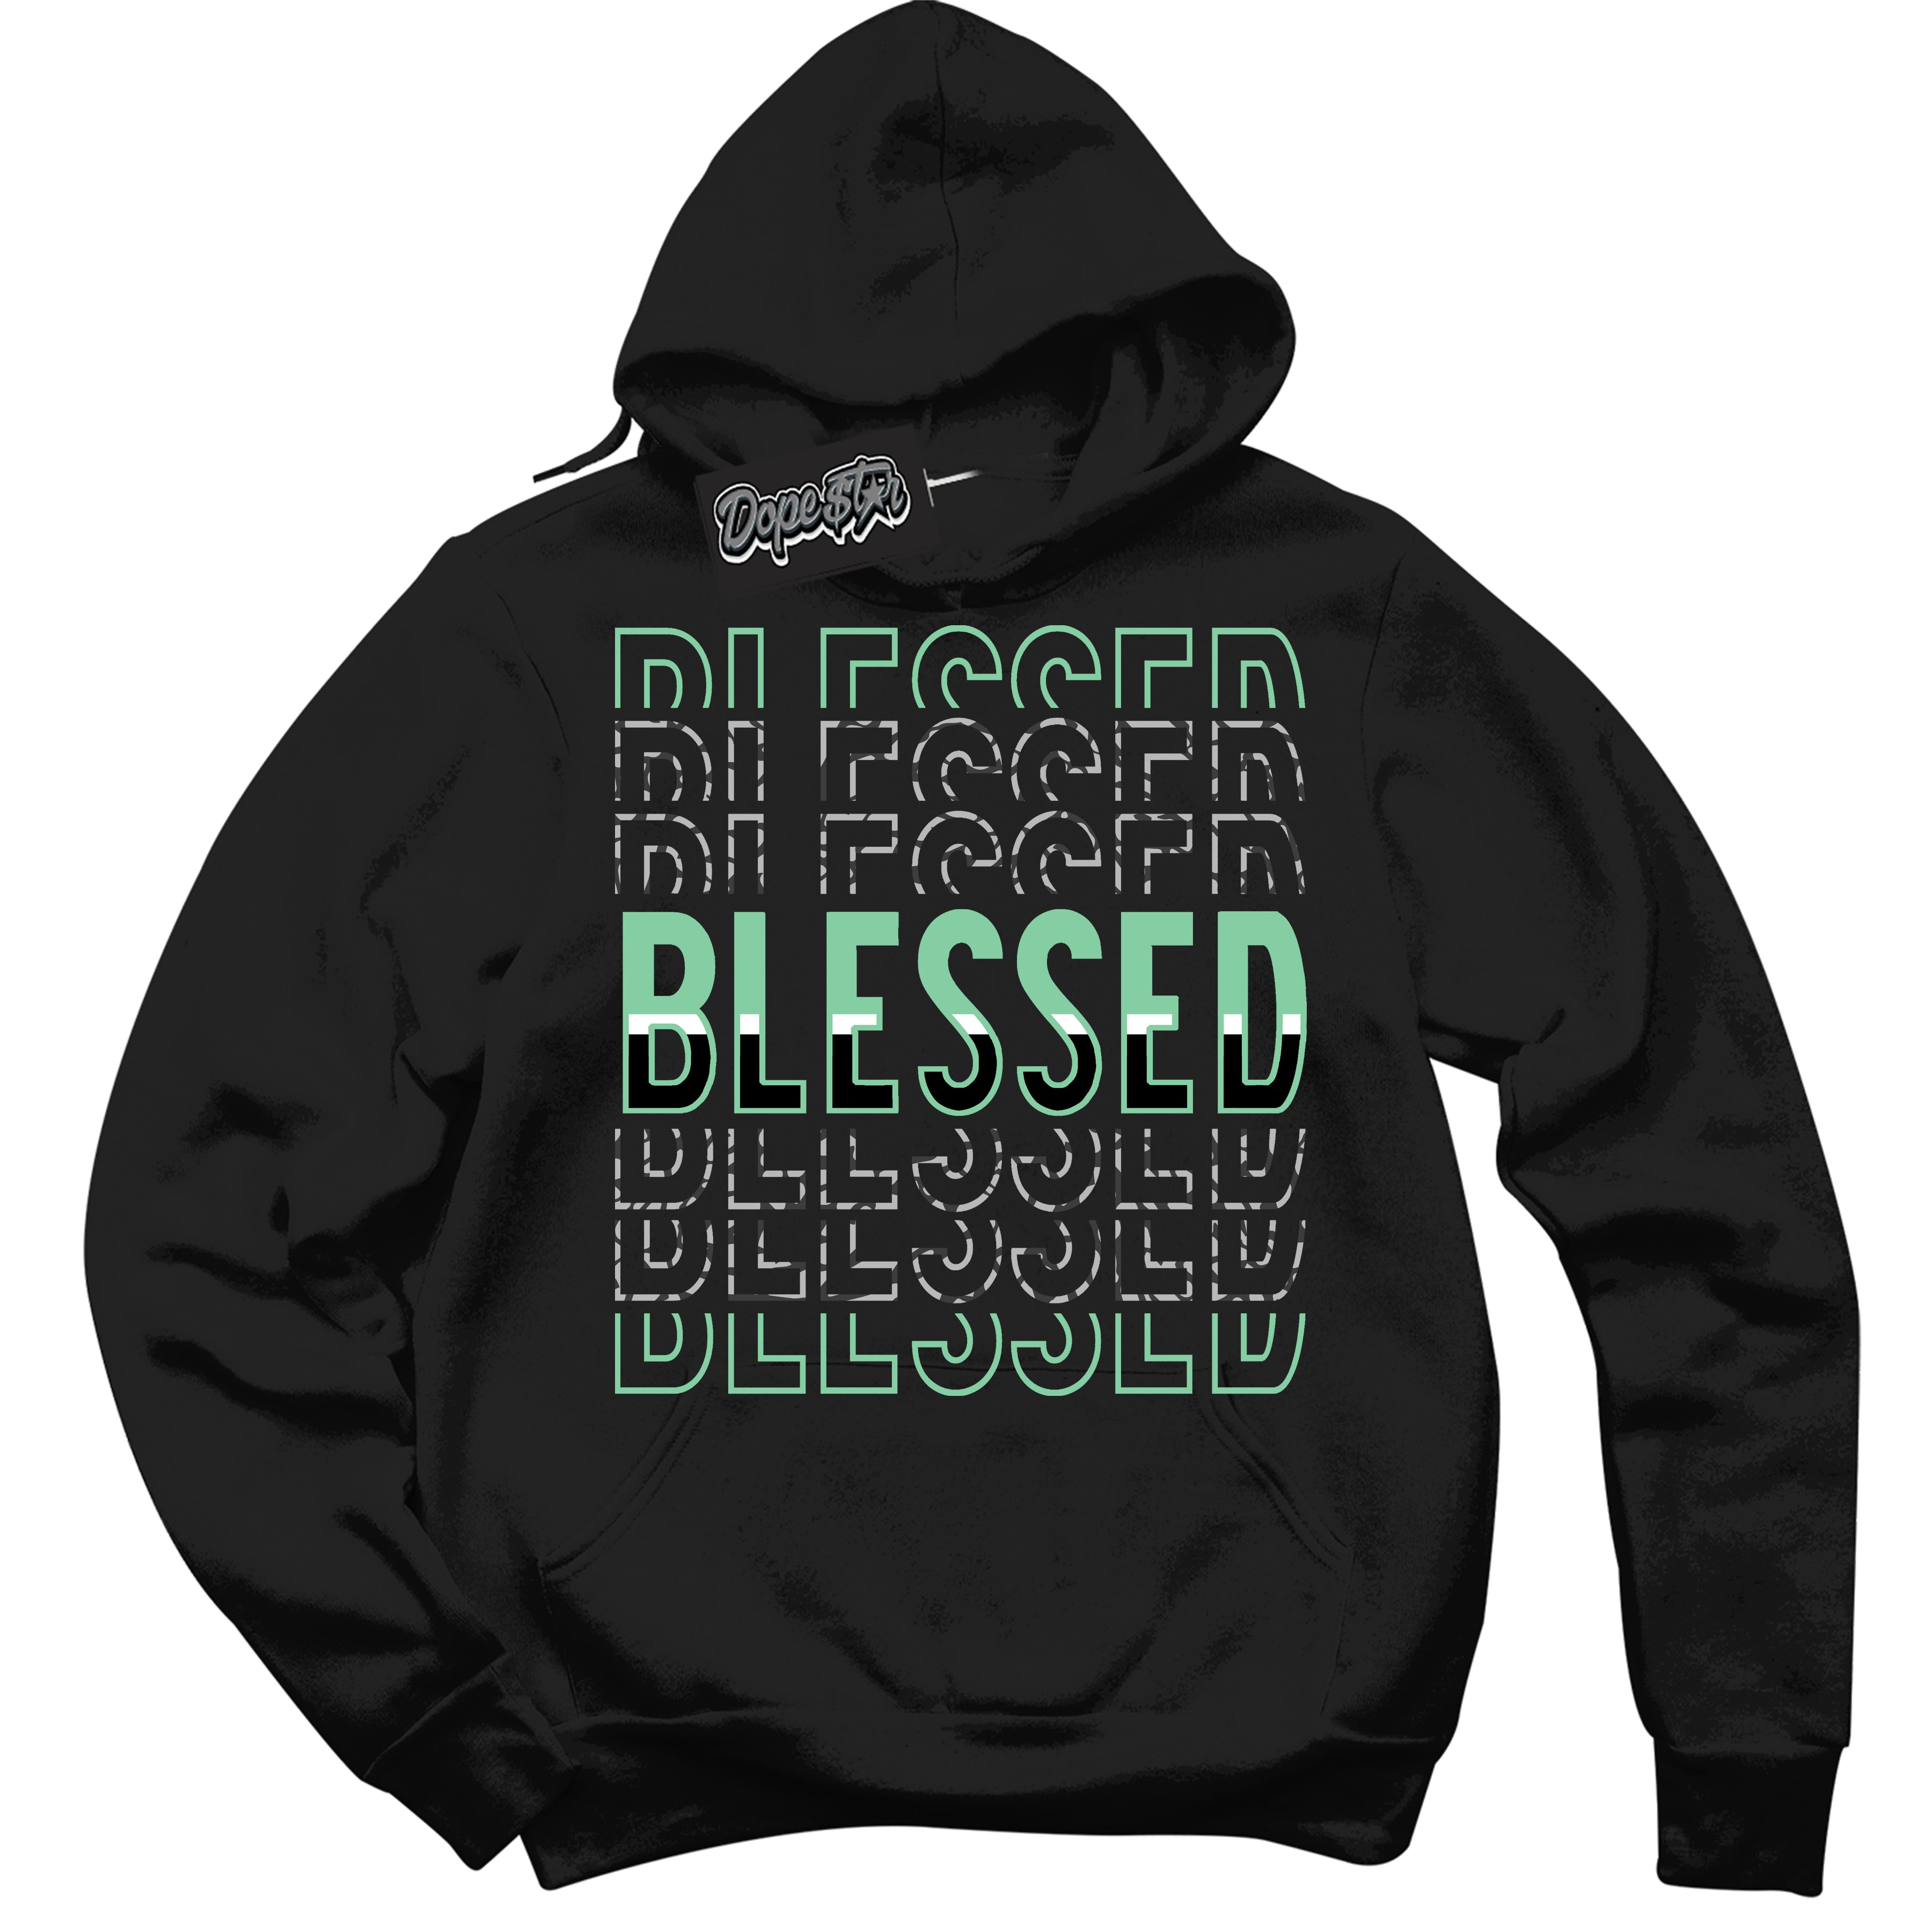 Cool Black Graphic DopeStar Hoodie with “ Blessed Stacked “ print, that perfectly matches Green Glow 3S sneakers